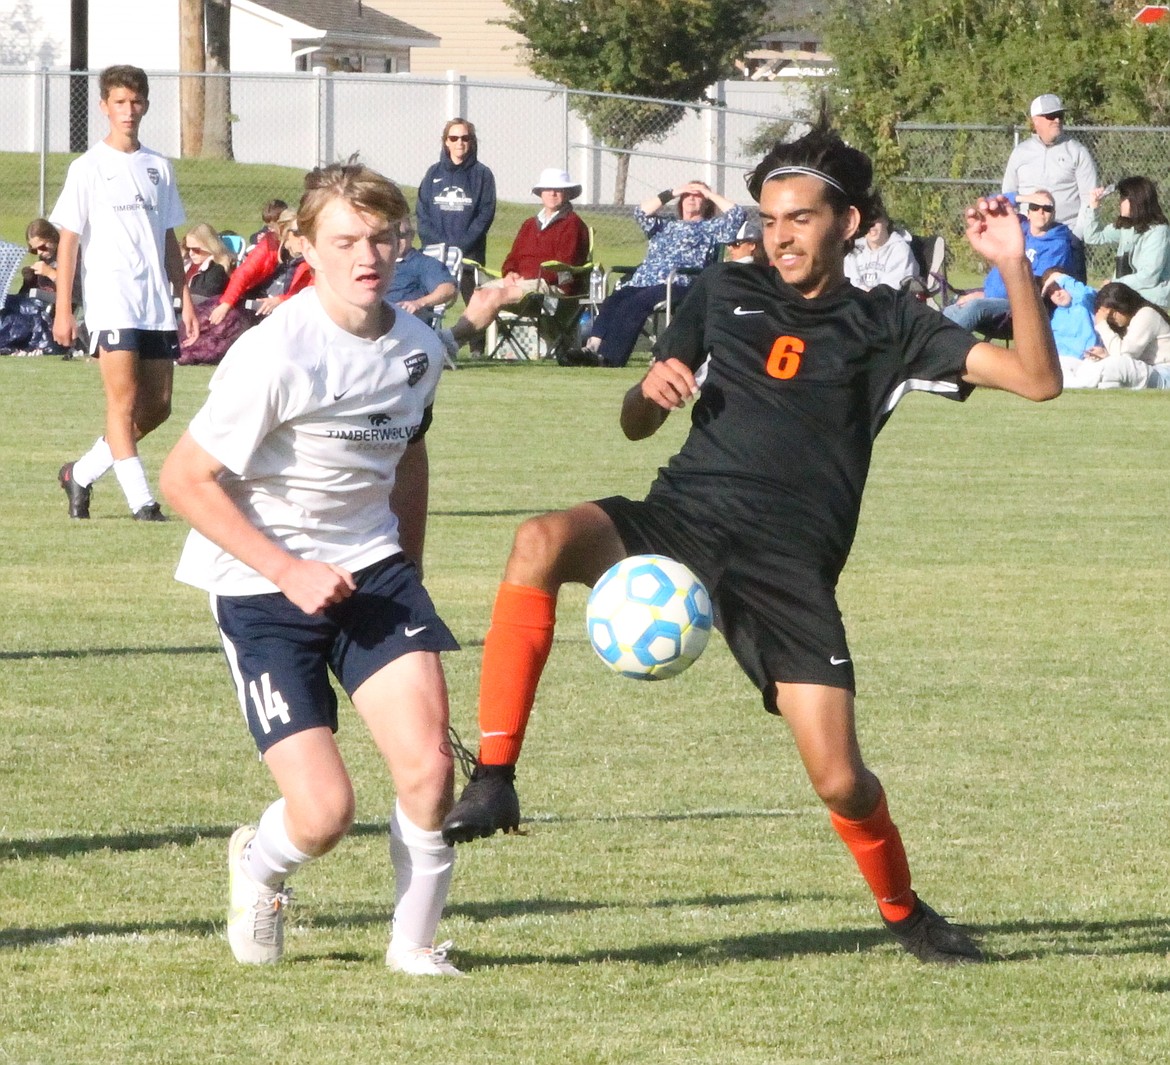 MARK NELKE/Press
Bryce Allred, left, of Lake City, and Jesus Aparicio (6) of Post Falls vie for the ball in the second half Tuesday at Post Falls High.